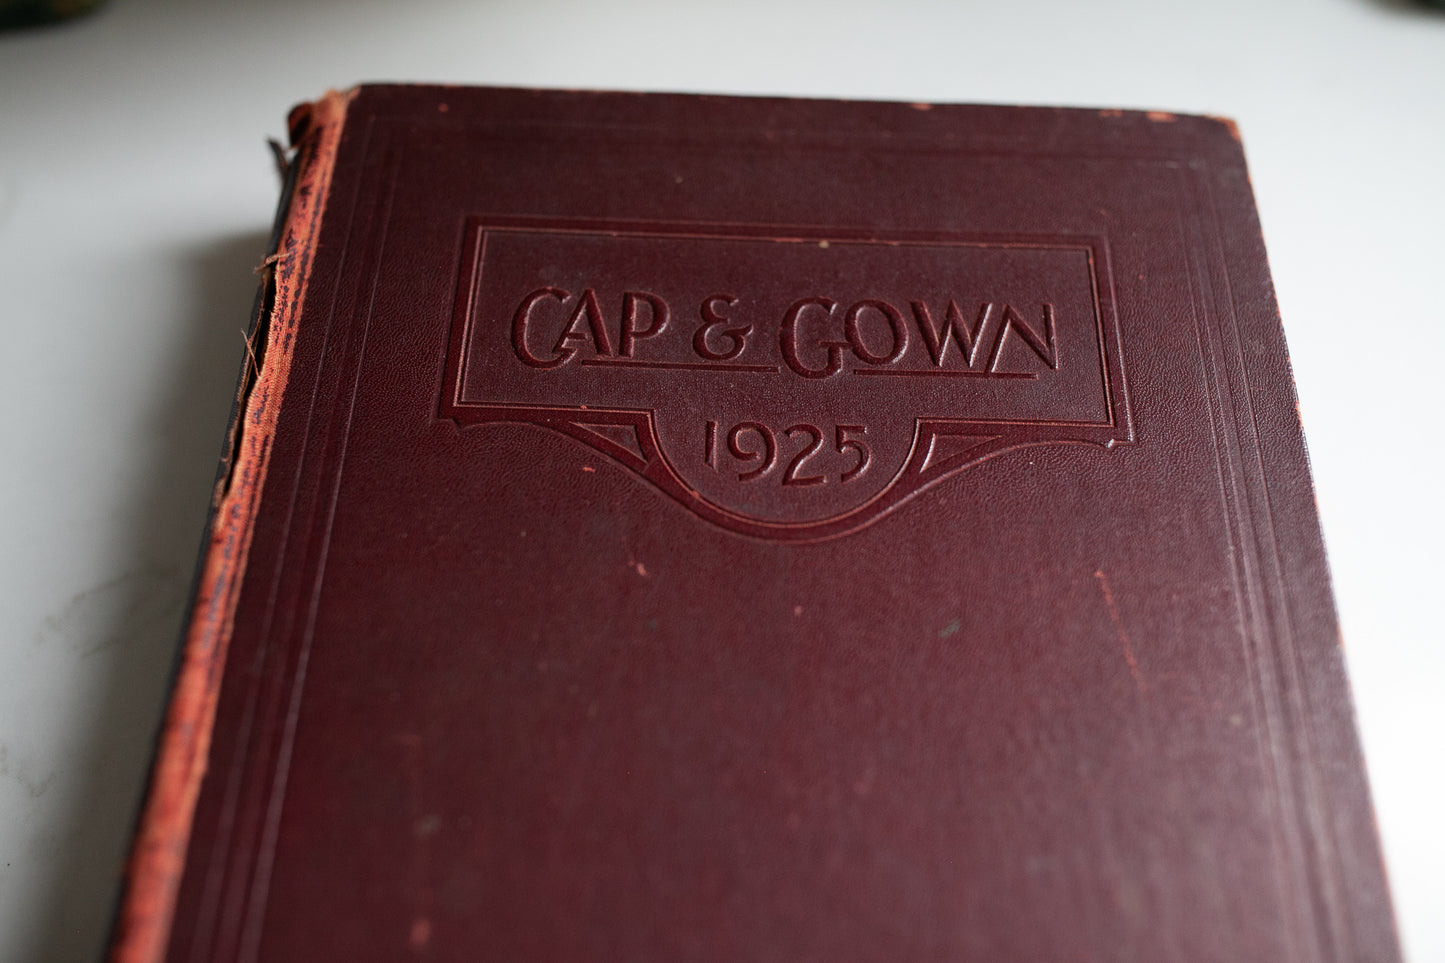 Cap and Gown 1925 University of Chicago - Vintage Book- Year Book